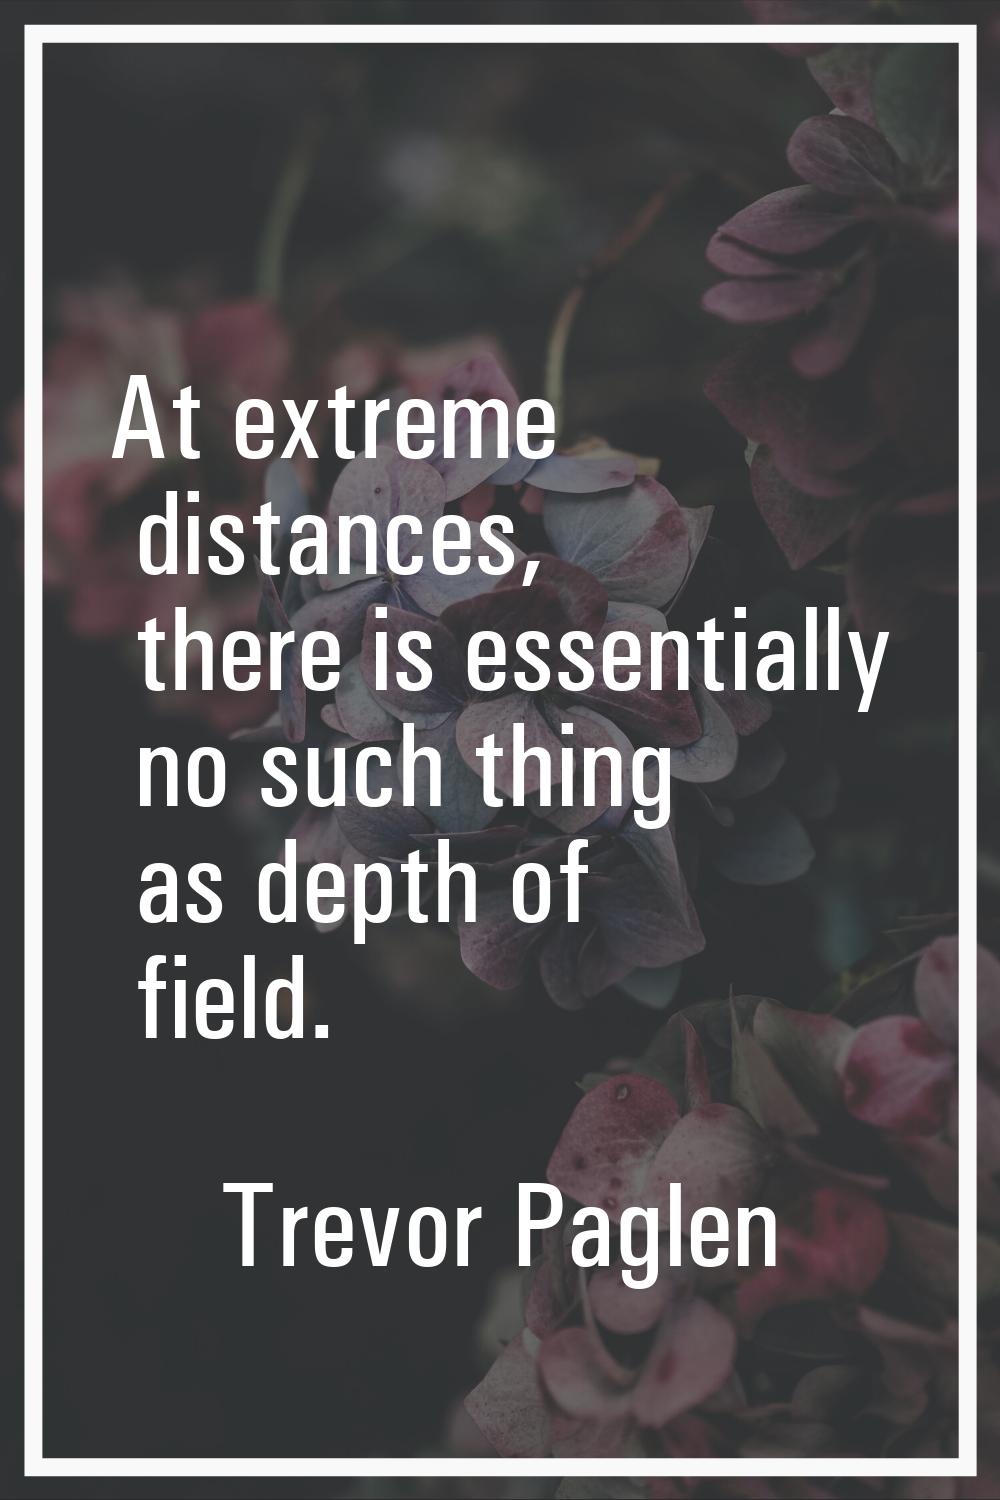 At extreme distances, there is essentially no such thing as depth of field.